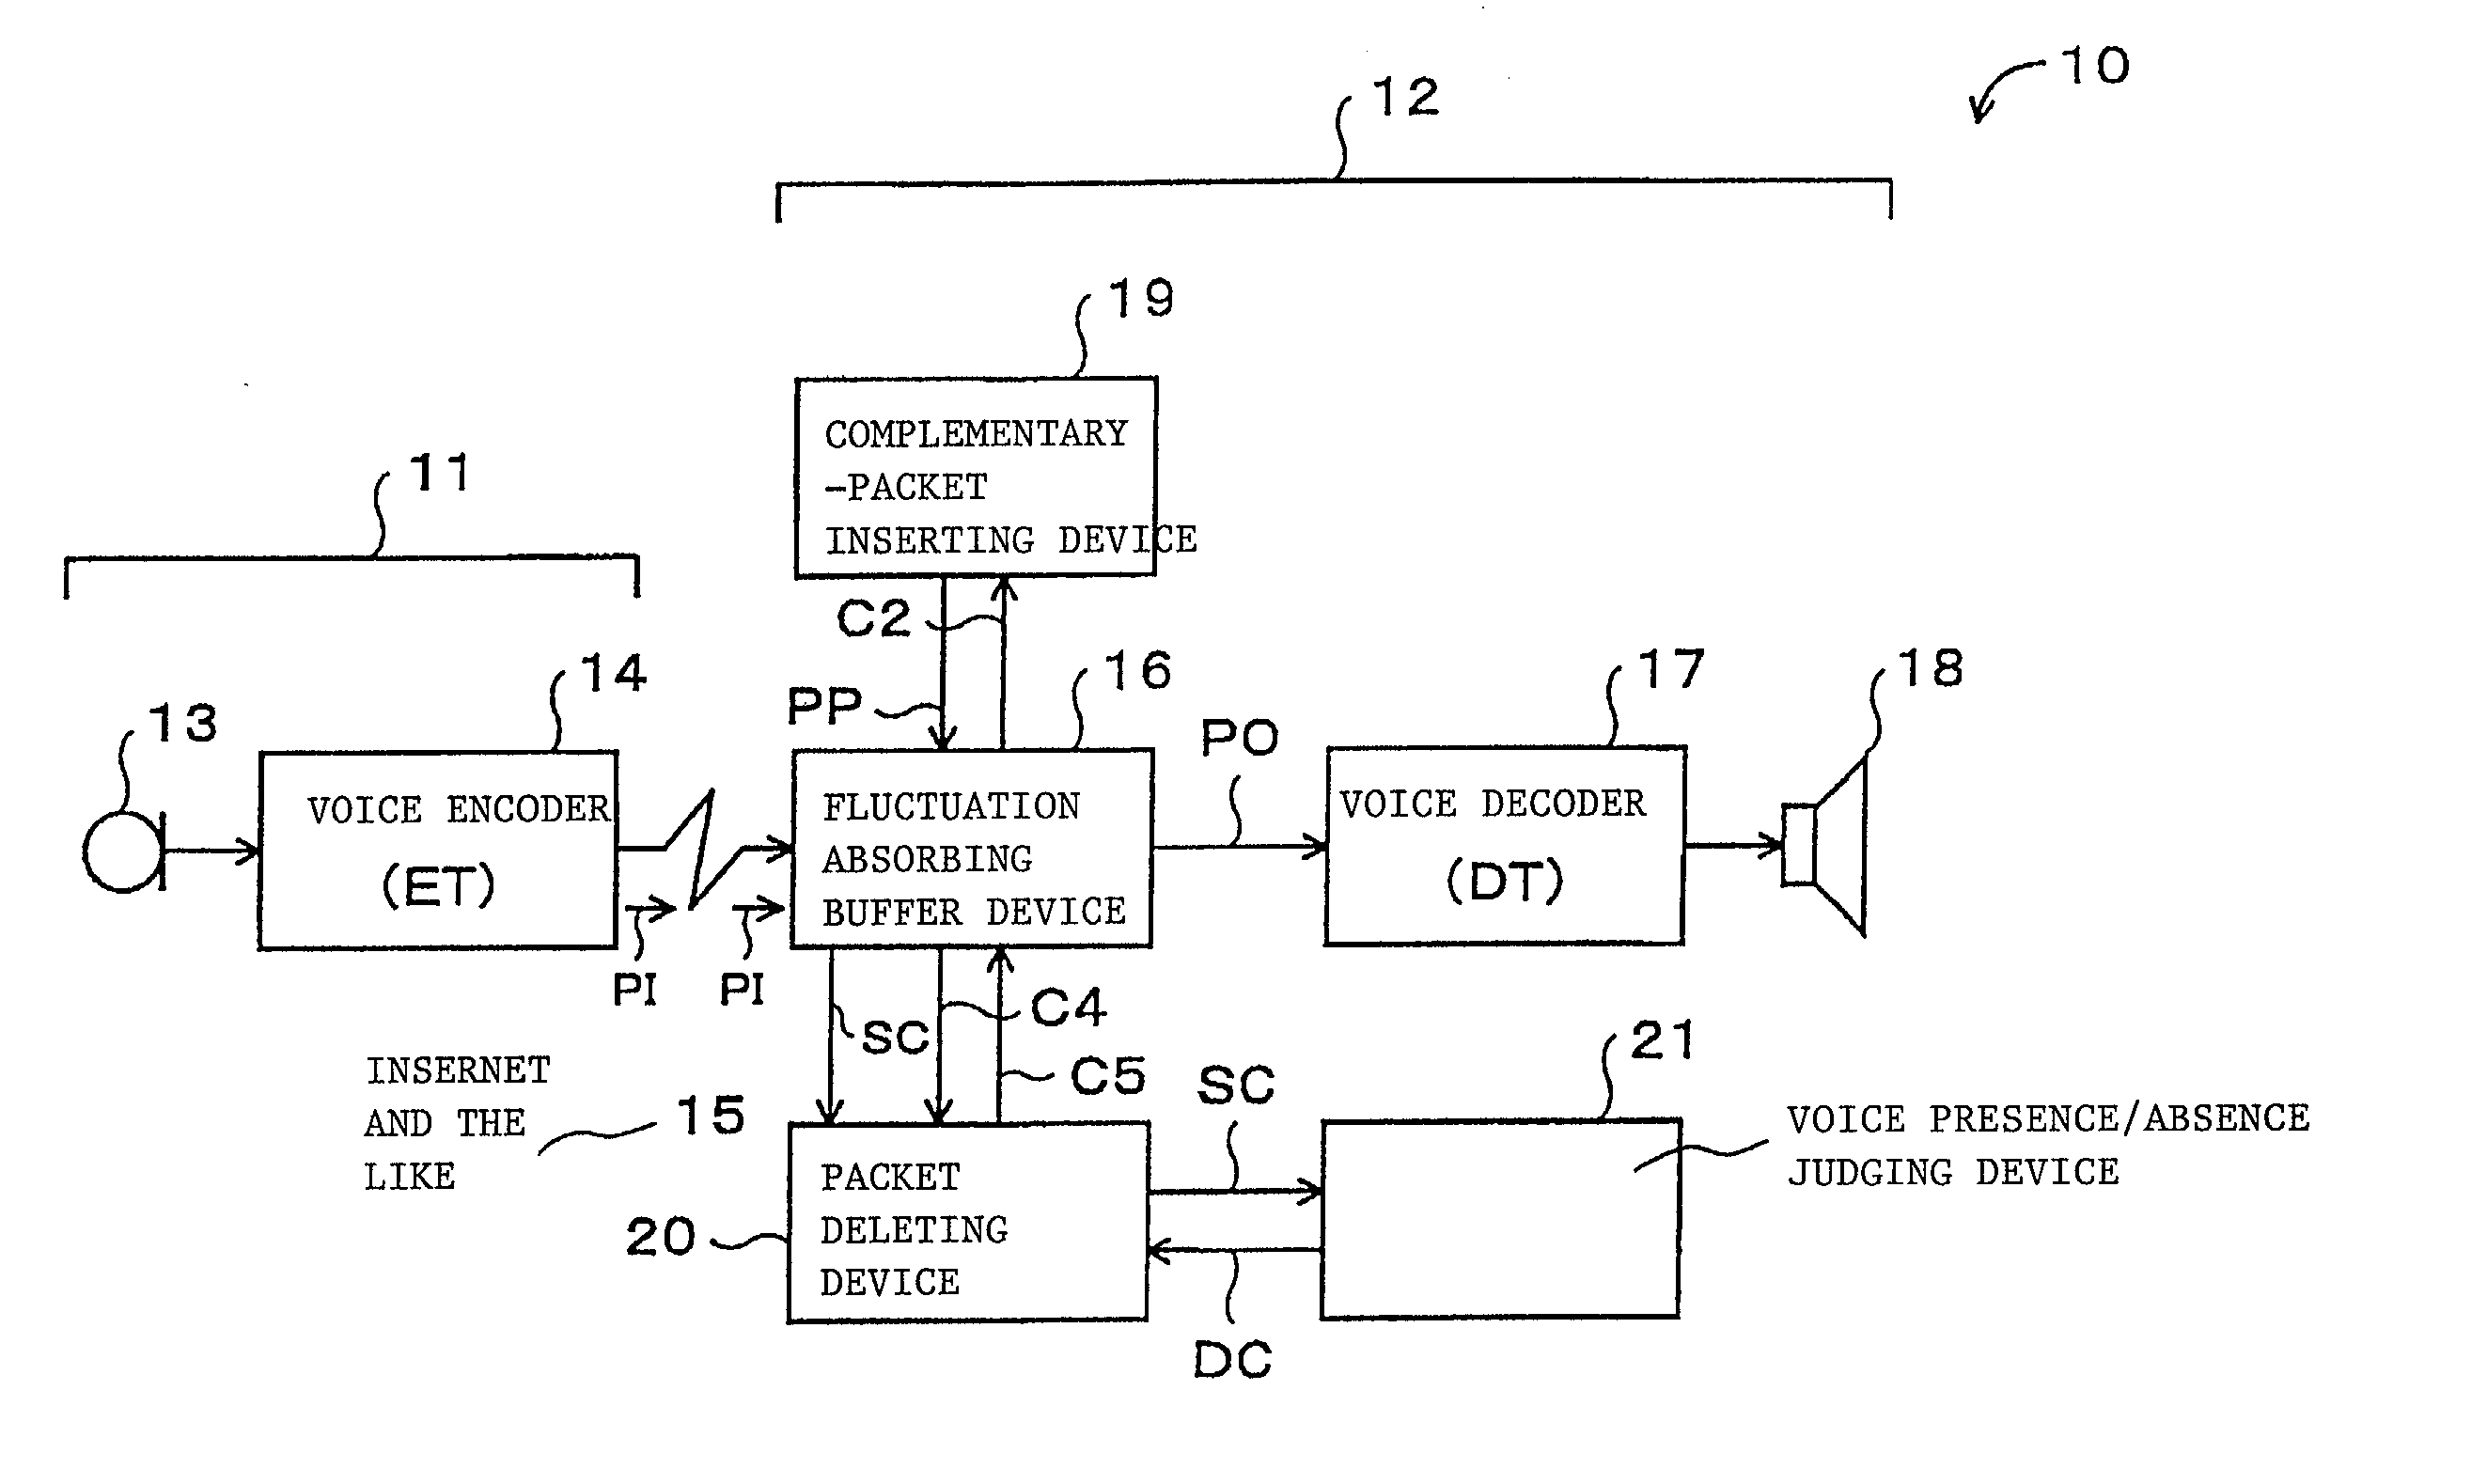 Quality control device for voice packet communications